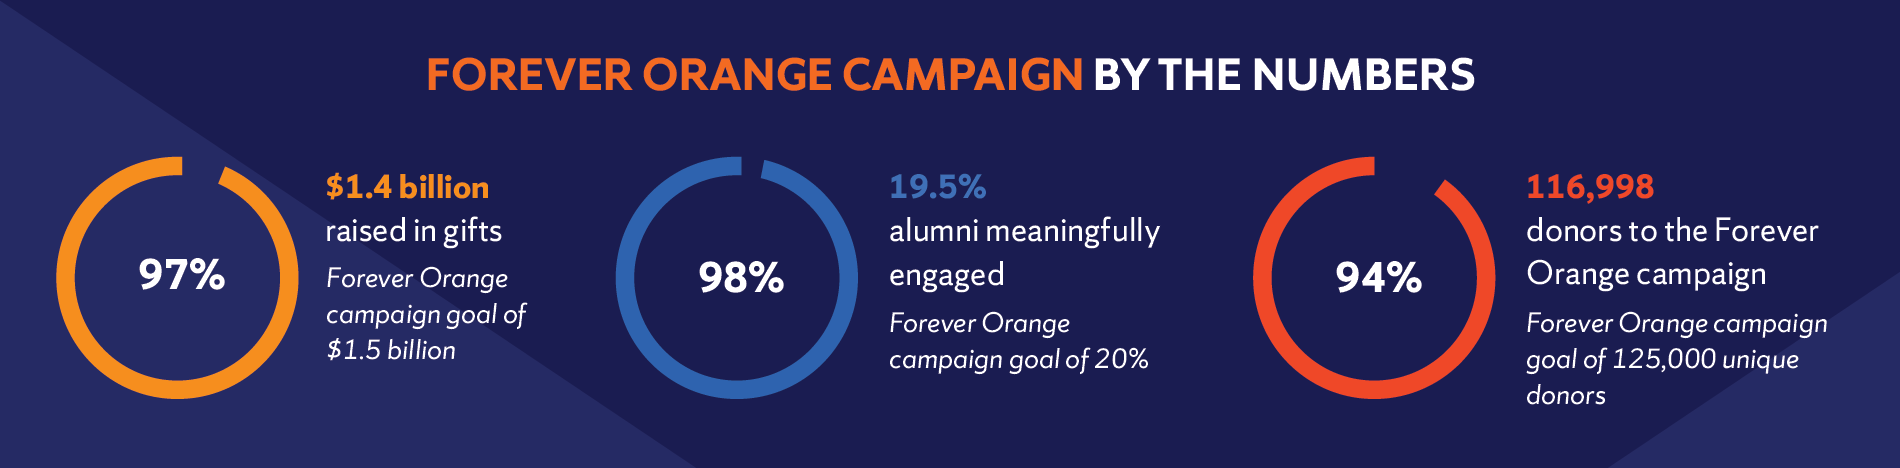 Forever Orange Campaign by the Numbers